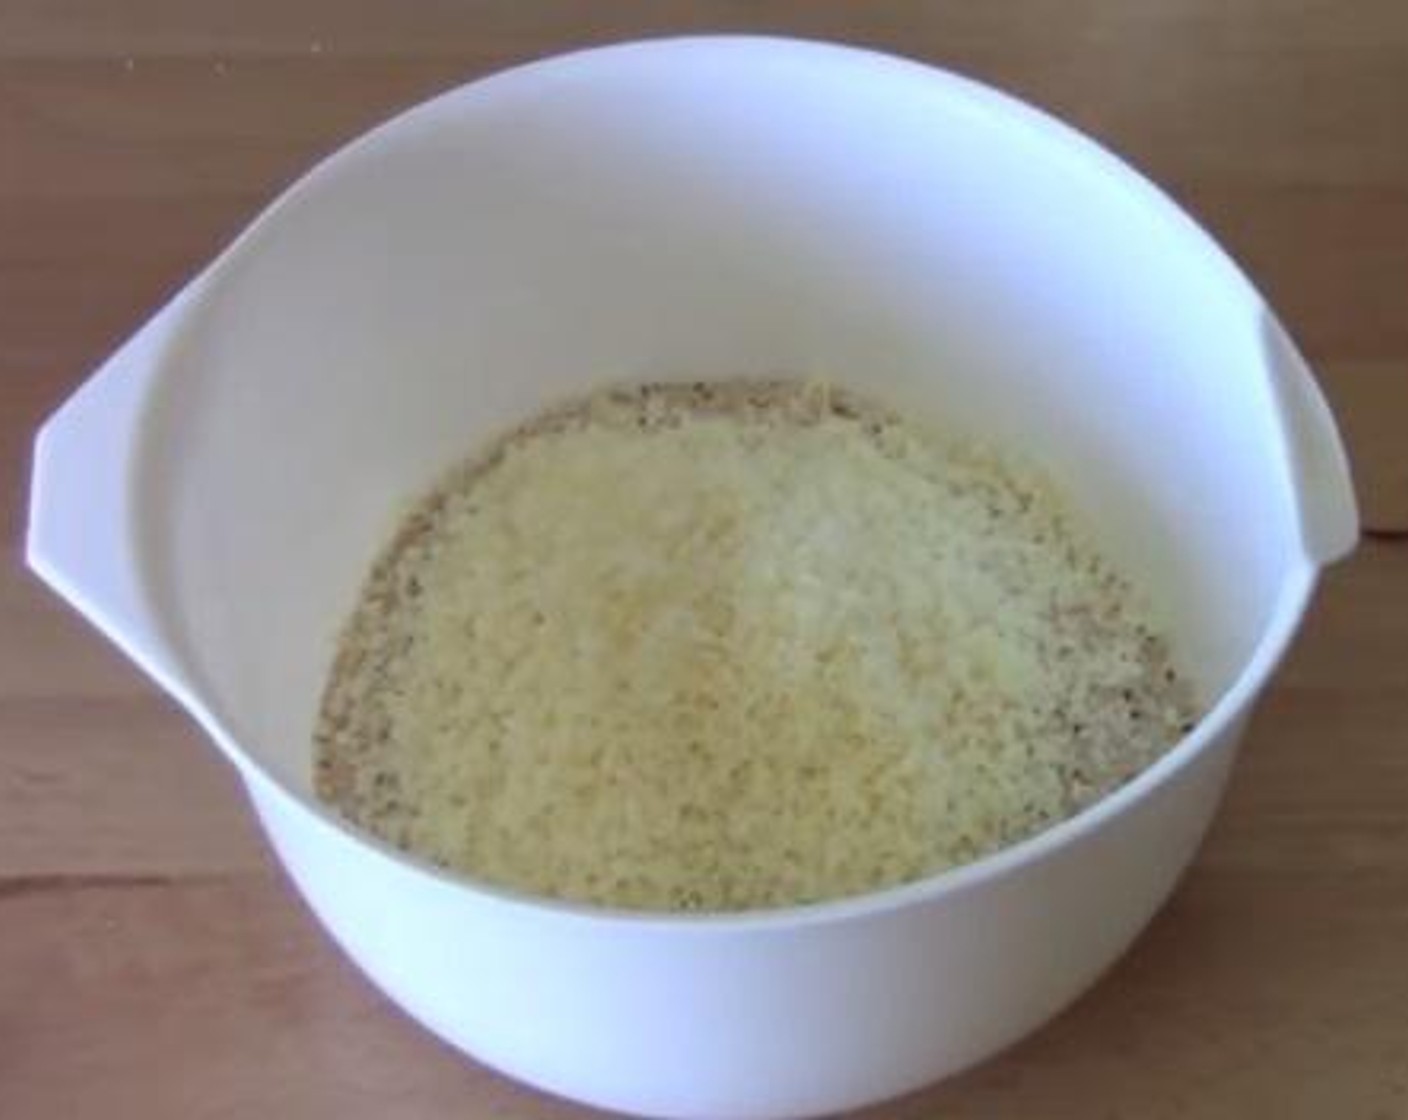 step 3 In a mixing bowl add and mix the FIne Dry Breadcrumbs (2 cups), McCormick® Garlic Powder (1 tsp), Parmesan Cheese (1 cup), Salt (to taste), and Ground Black Pepper (to taste). Into 2 other separate bowls, place the Eggs (2) and All-Purpose Flour (1 cup) separately.